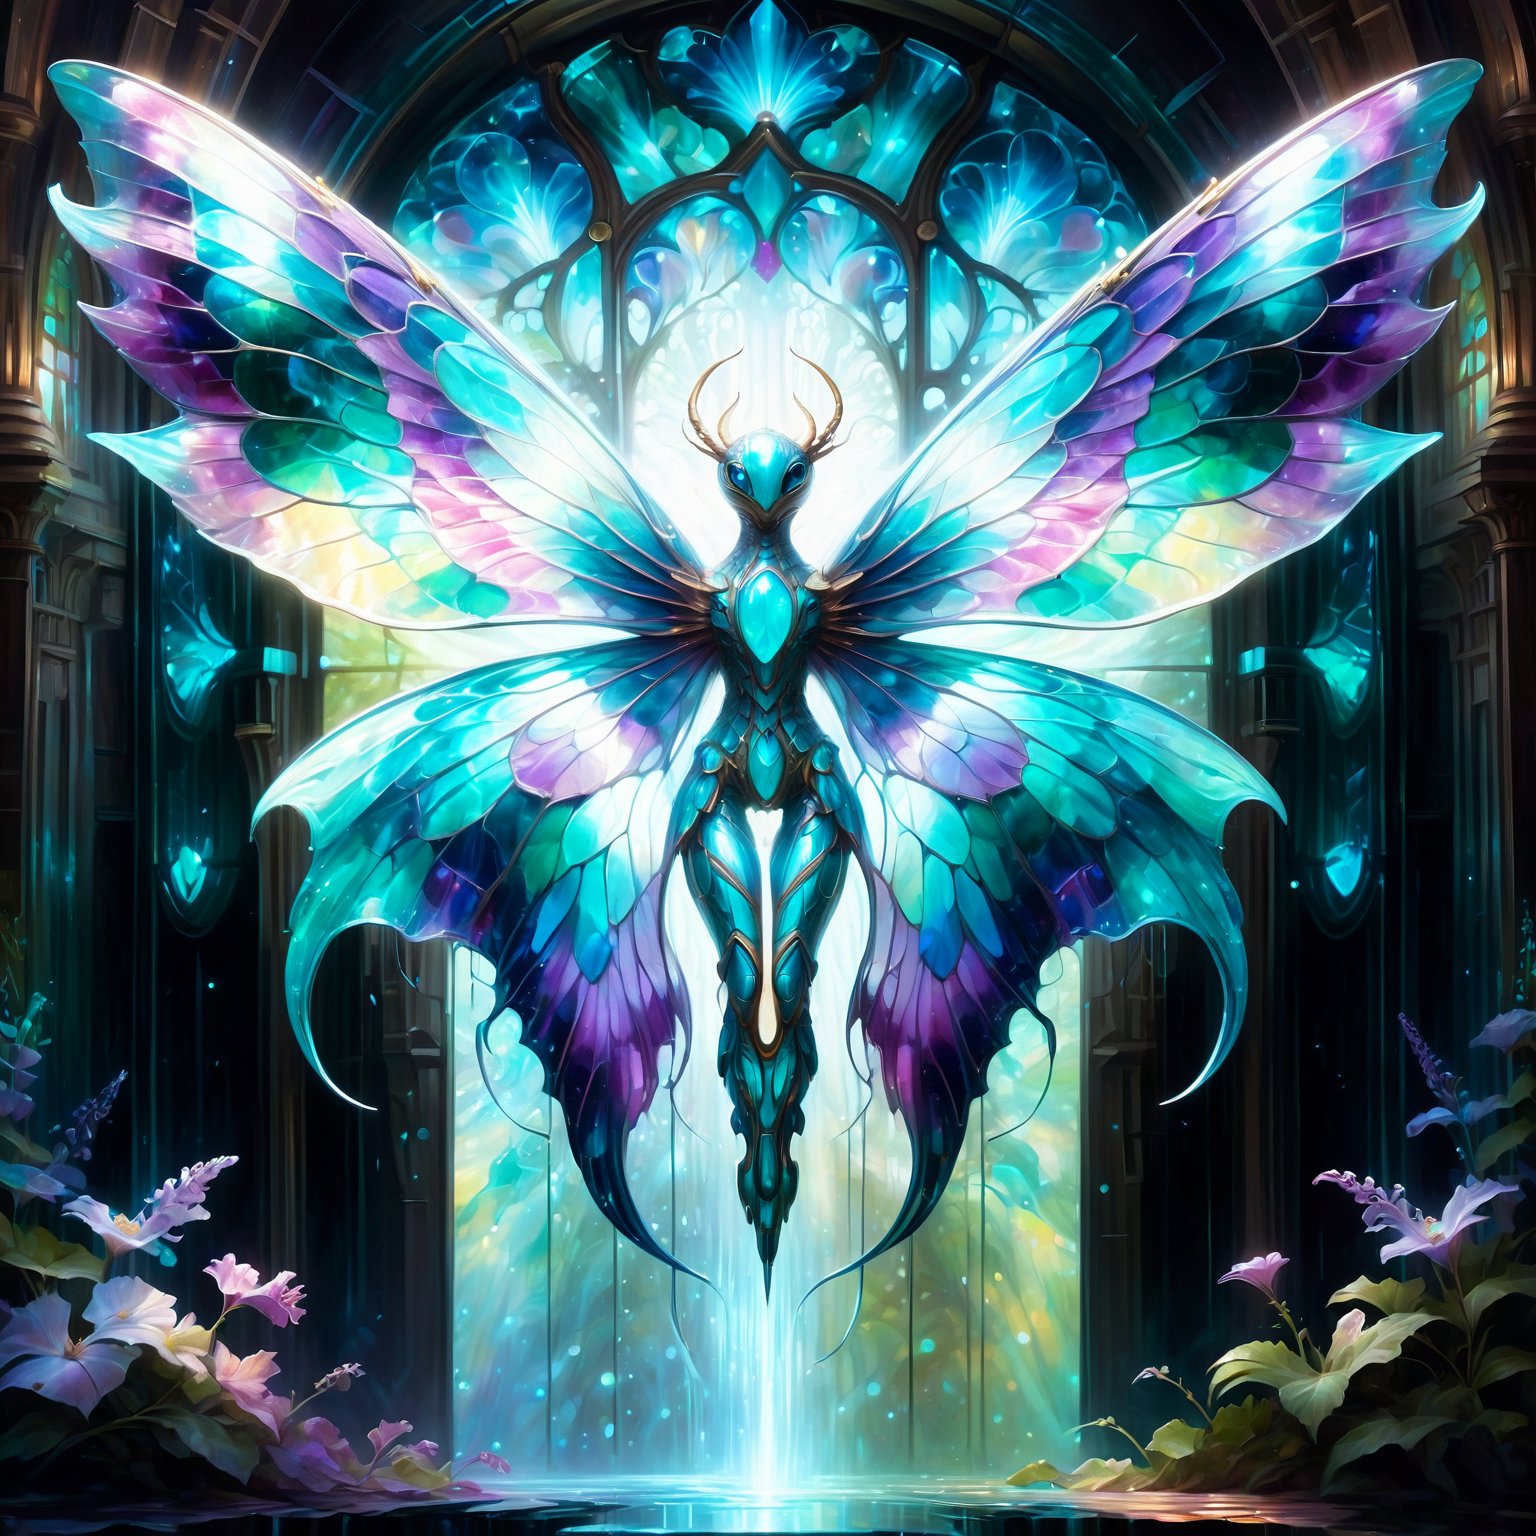 In a dreamlike acrylic painting, a mesmerizingly ethereal creature takes center stage. Its body is adorned with soft, flickering bioluminescence, creating an otherworldly glow that illuminates the surrounding darkness. The elegant and intricate pattern of its translucent wings resembles delicate stained glass, reflecting vibrant hues of turquoise and amethyst. Its fragile yet resilient form floats effortlessly in the air, radiating a serene and captivating presence. This stunning image leaves viewers breathless, with its masterful brushstrokes and meticulous attention to detail, truly showcasing the artist's exceptional talent.